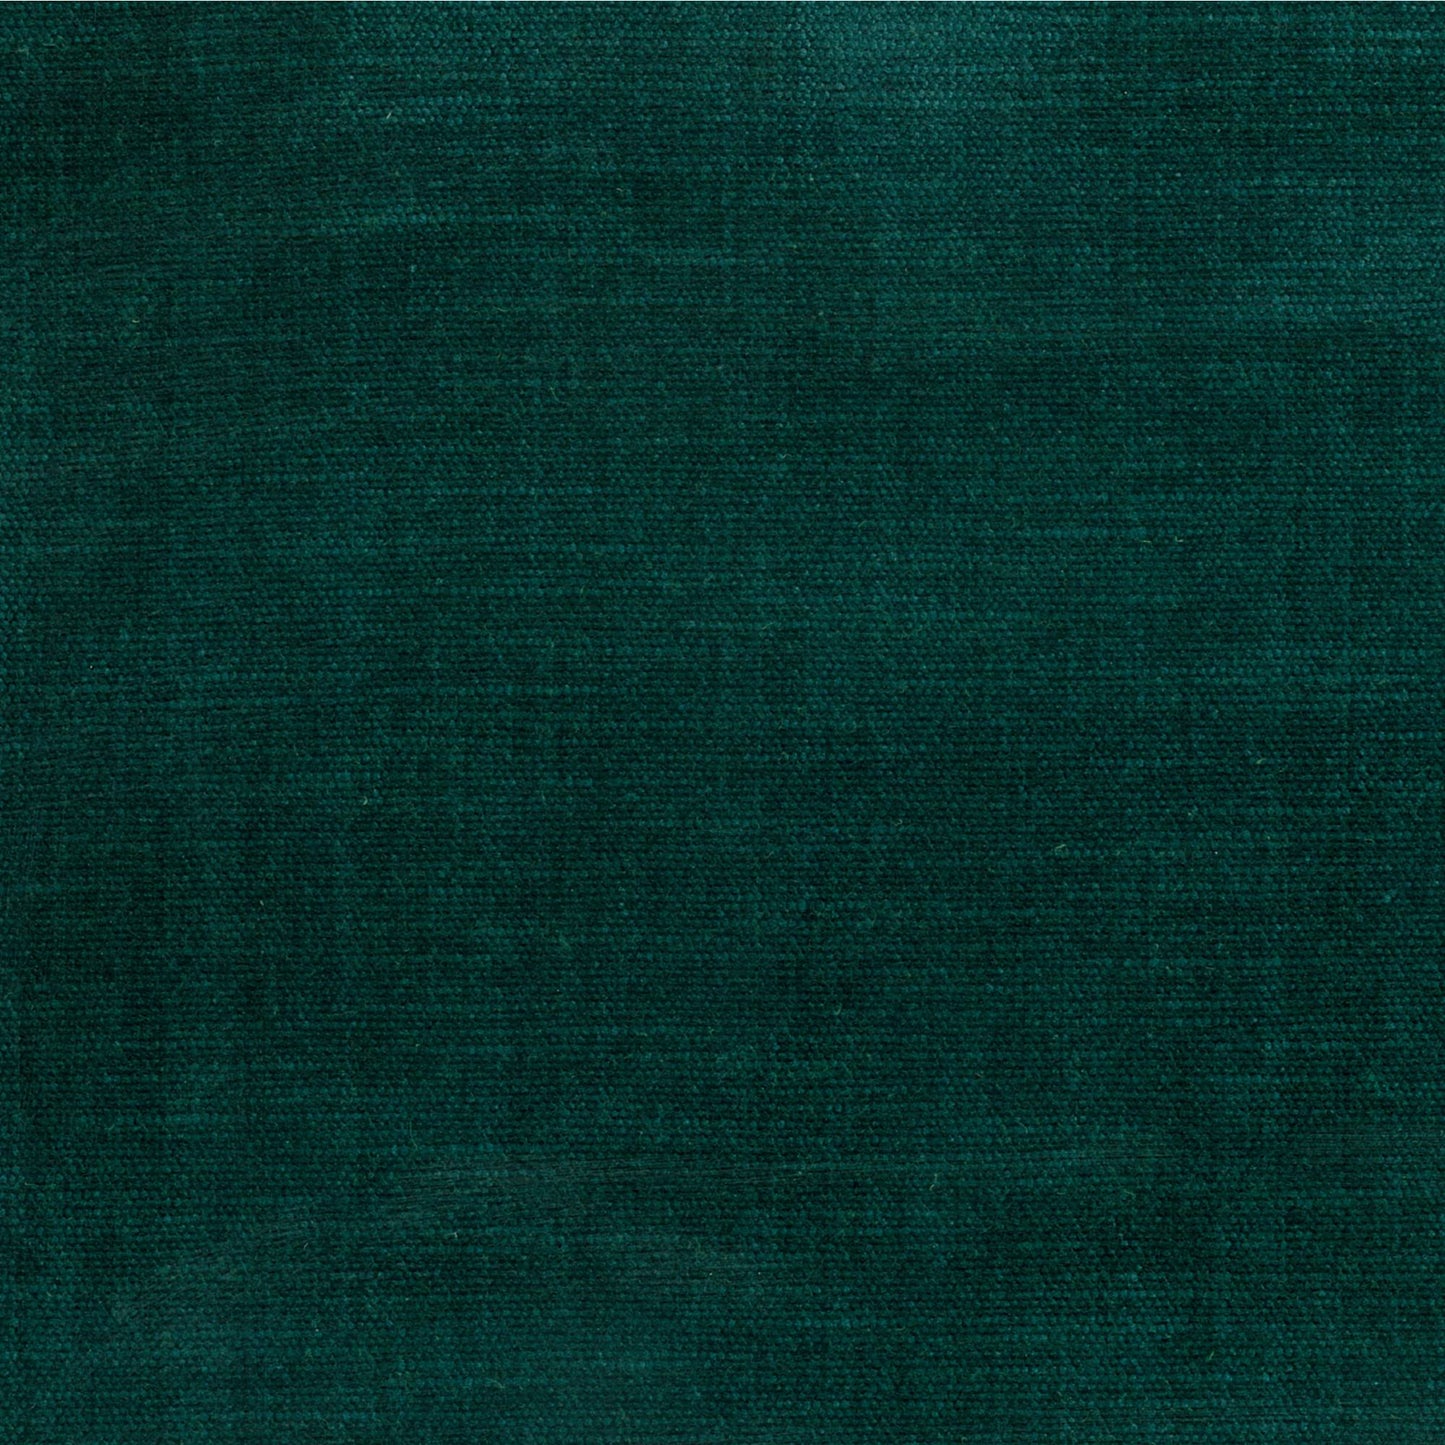 ORLEANS EVERGREEN FABRIC SAMPLE | PREMIUM COLLECTION